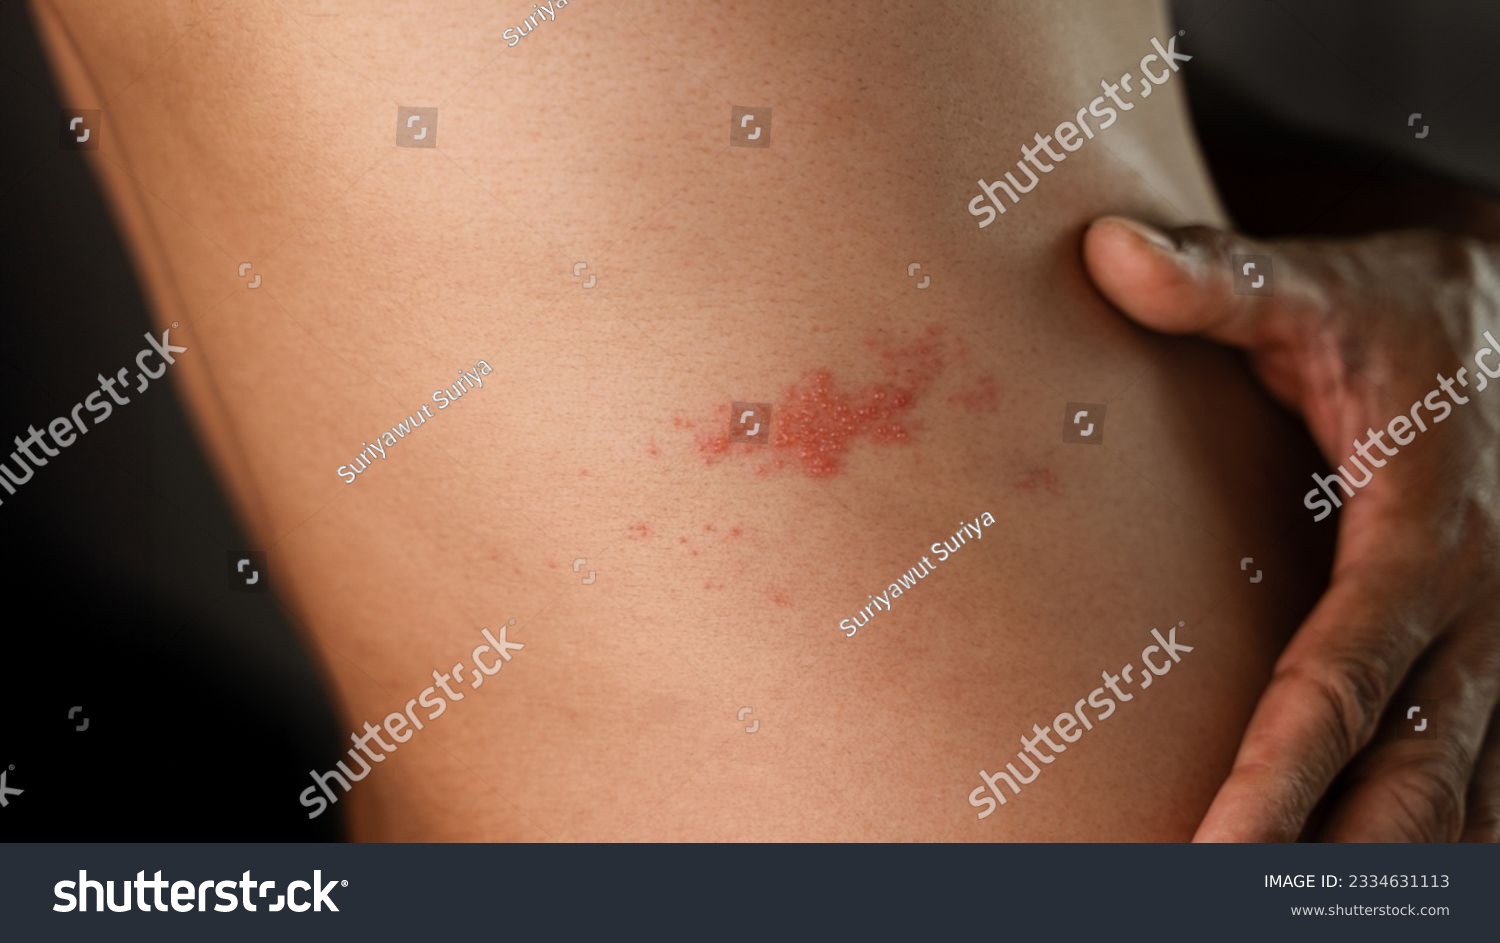 Man with shingles disease, skin infected with Herpes zoster, virus, Healthcare and medical. #2334631113